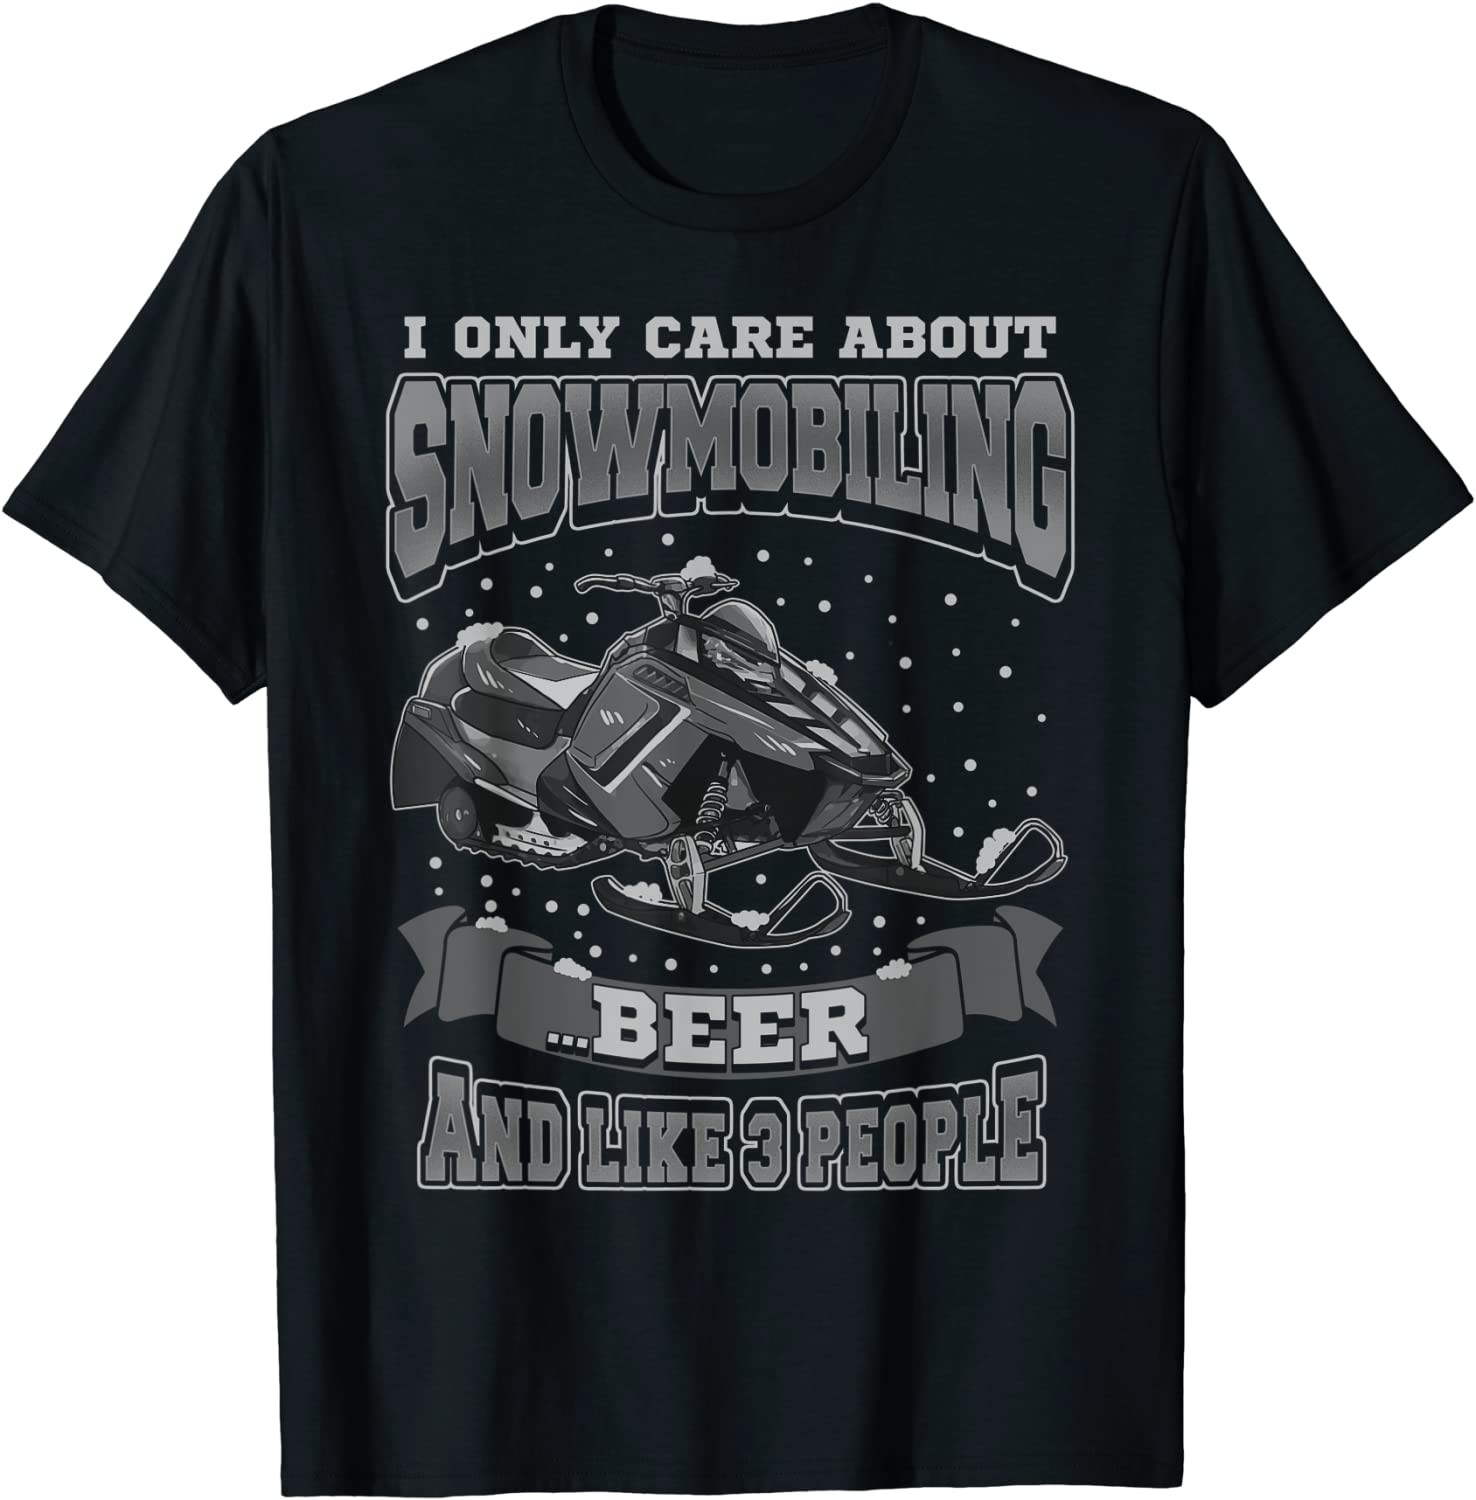 Snowmobiling Beer Drinking Snowmobile Sled T-Shirt